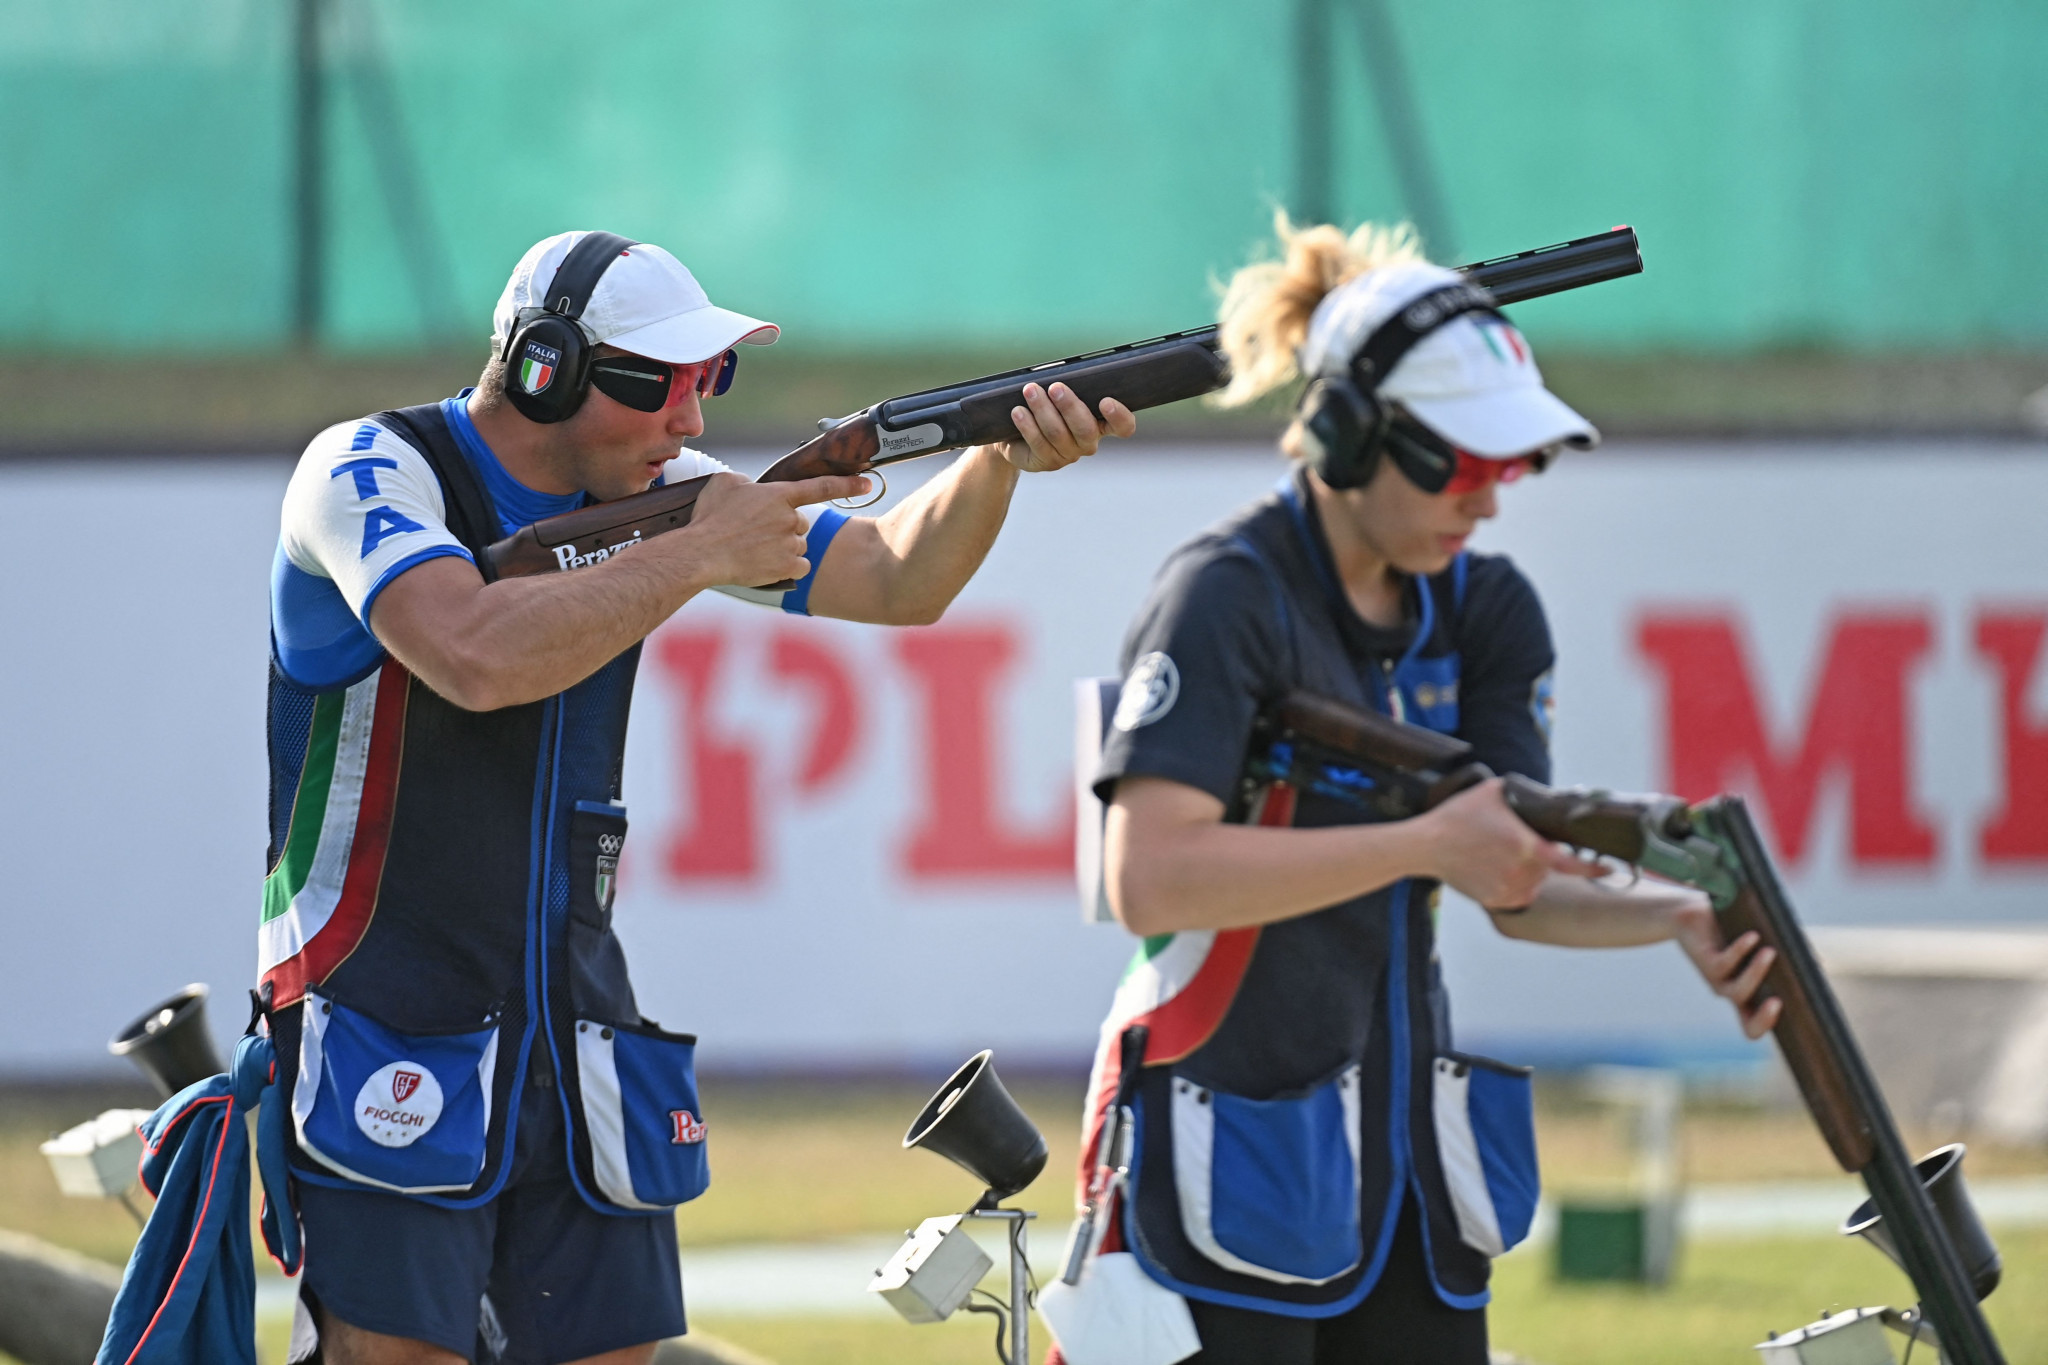 Valerio Grazini and Alessia Iezzi won the mixed team trap title ©Getty Images